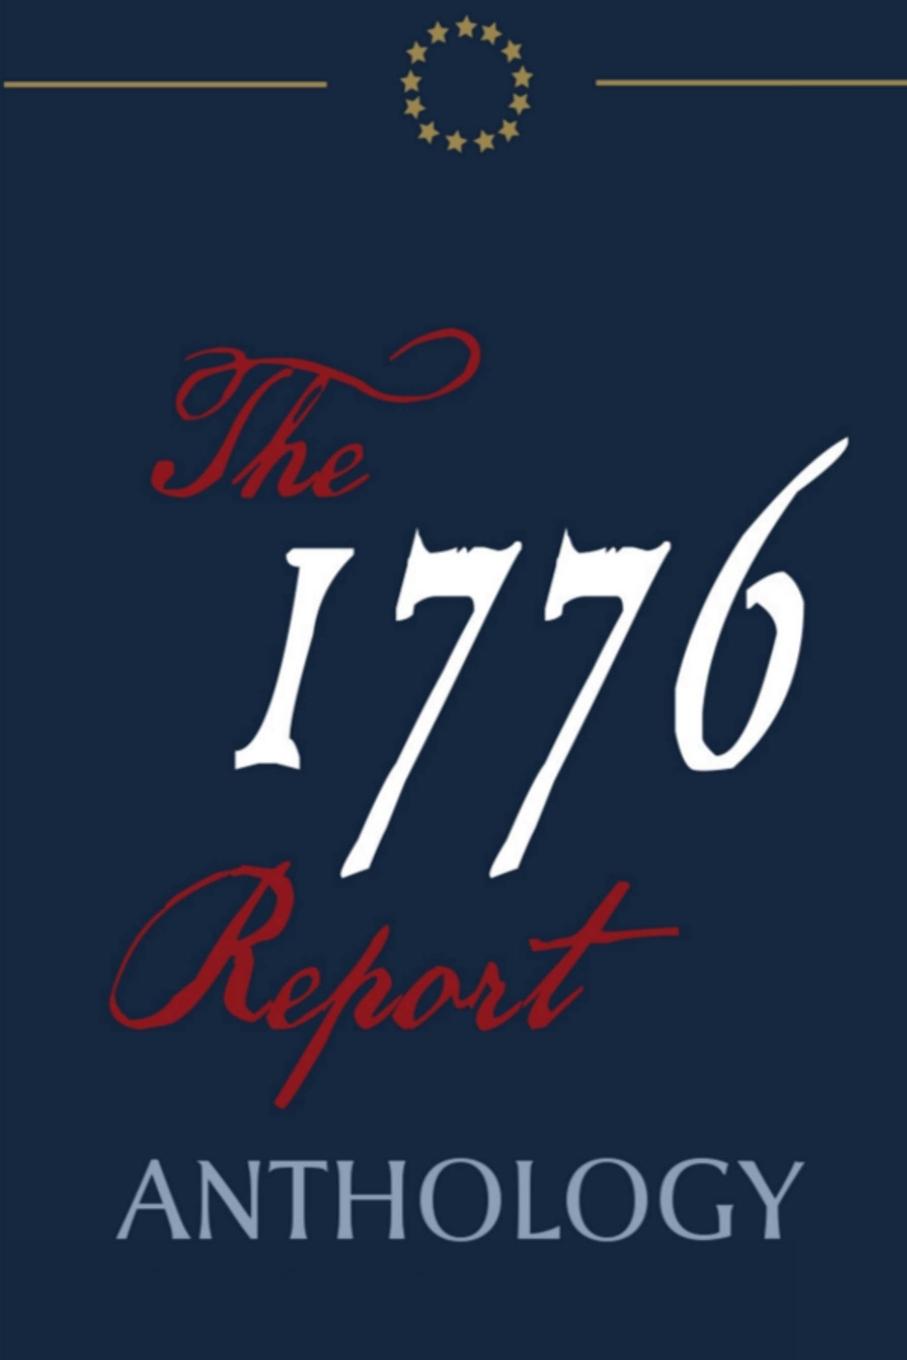 Book 1776 Report Anthology 